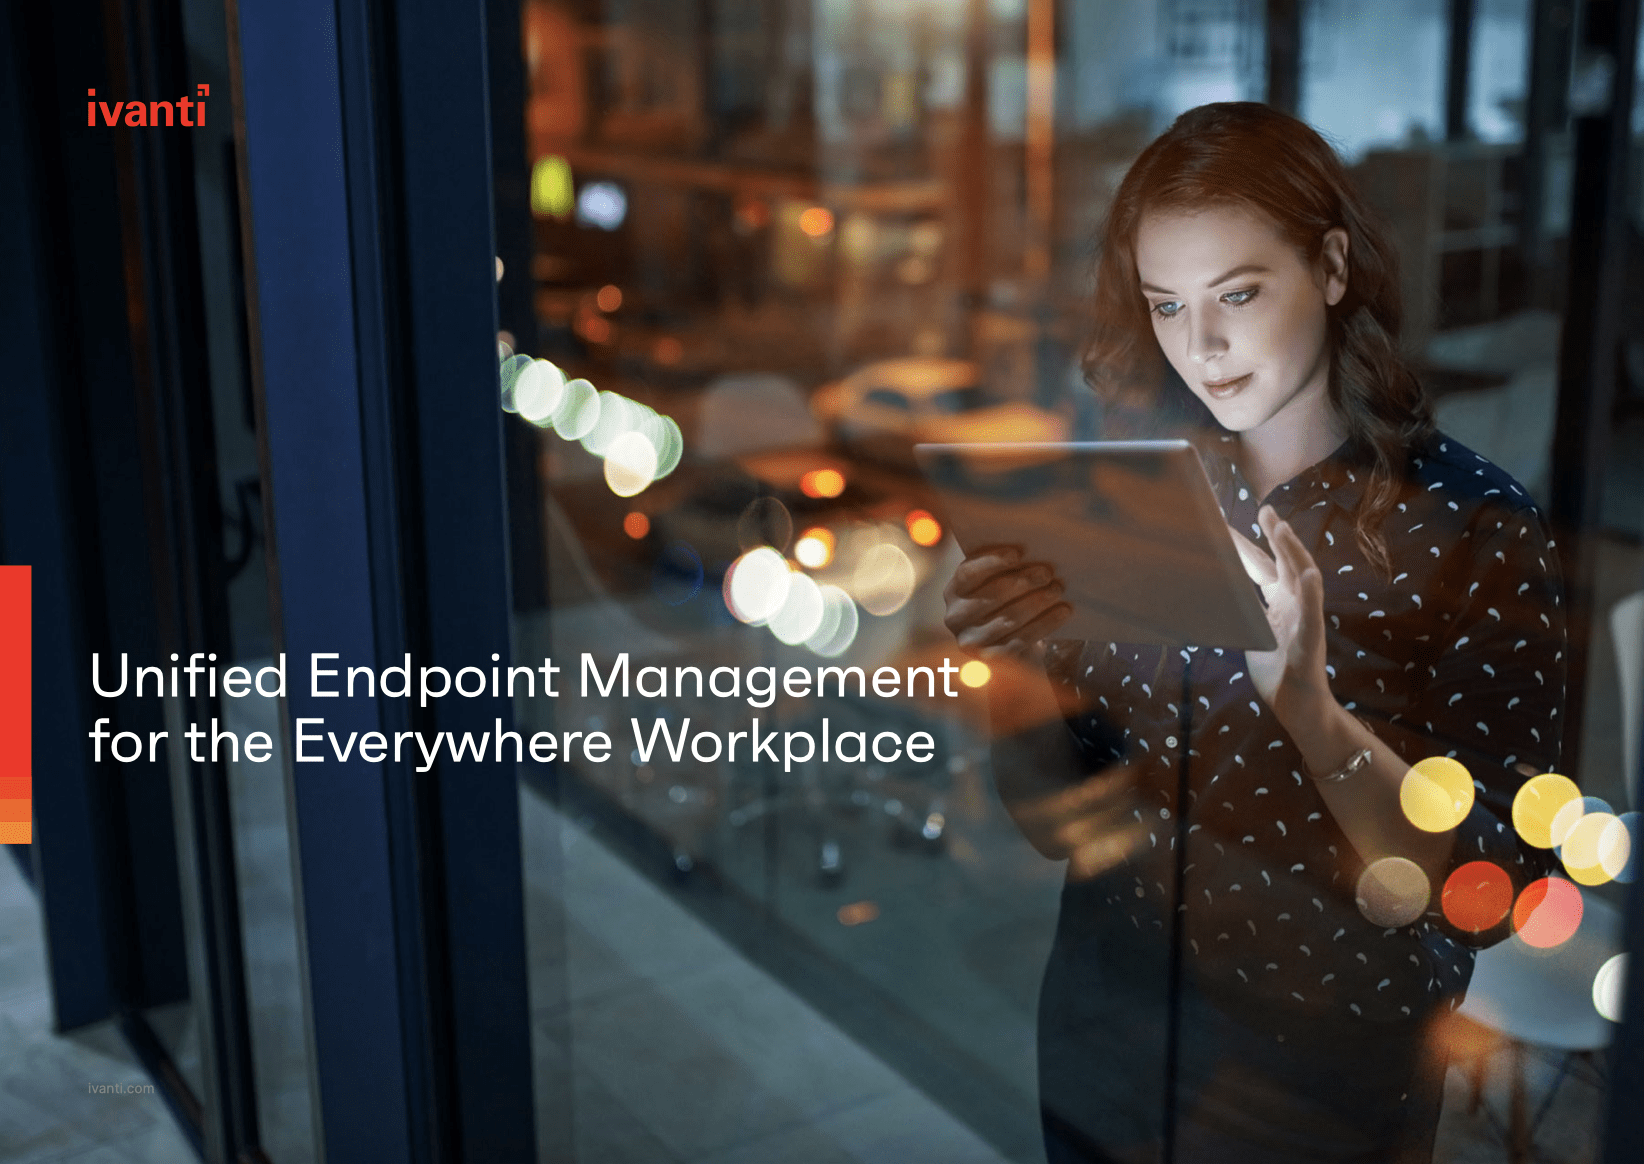 Unified Endpoint Management for the Everywhere Workplace - Unified Endpoint Management for the Everyday Workplace